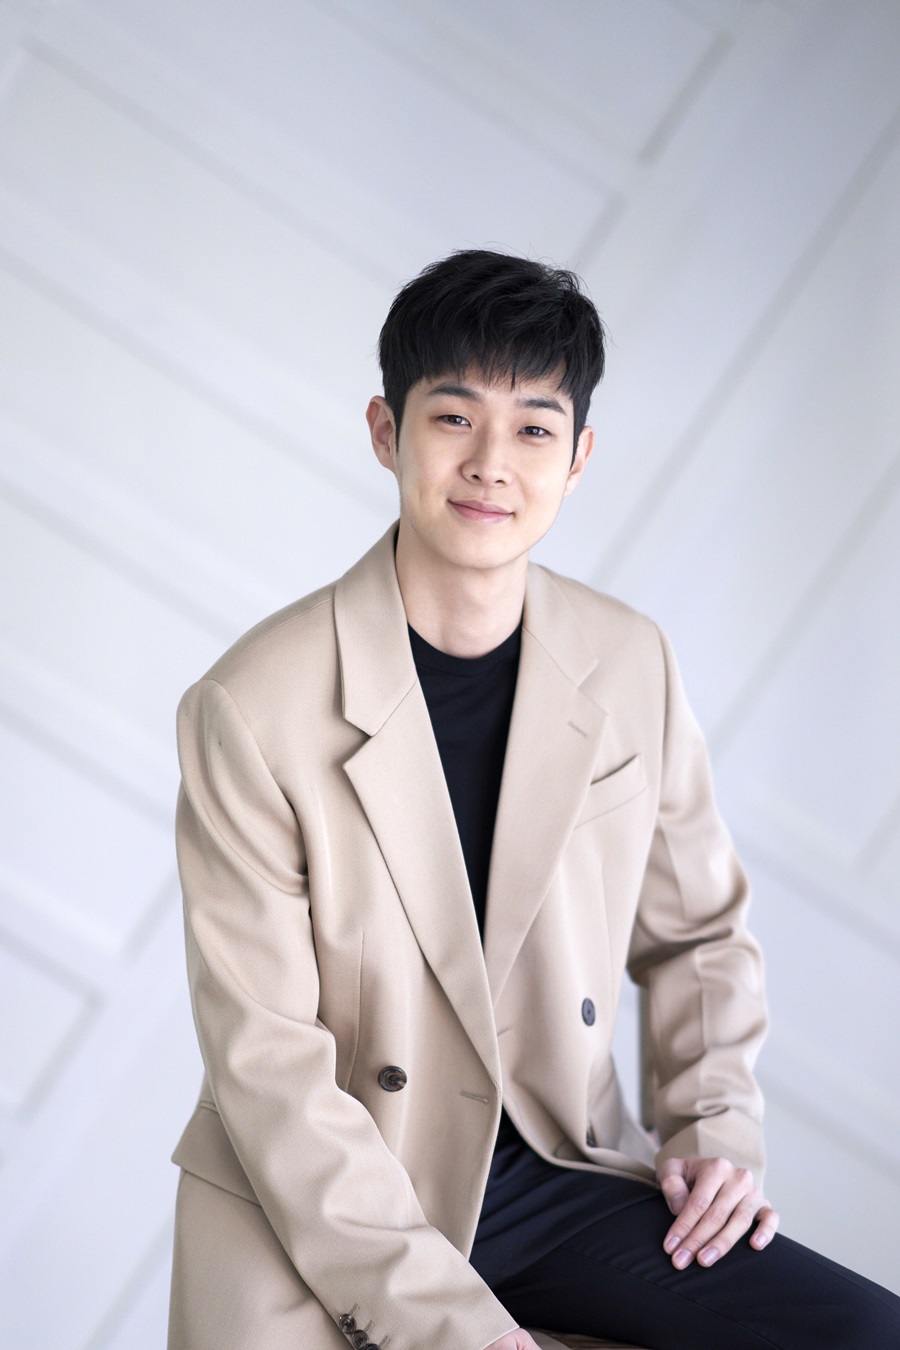 Actor Choi Woo-shik has expressed his feelings about the Netflix release of Time of Hunting.Choi Woo-shik was satisfied with the Netflix release of the movie Time of Hunting in an online video interview on the 29th, saying, I wanted to be seen abroad quickly and it was so good.Shooting Time, the next film released by director Yoon Sung-hyun in nine years, was not planned as Netflix original content, but turned to Netflix in conjunction with the aftermath of Corona 19.It was the first time that commercial films with a total production cost of 12 billion won were released on Netflix, not theaters, in more than 190 countries on the afternoon of the 23rd.Time of Hunting Content Panda, an overseas distributor, has been suffering from the Netflix screening, applying for a ban on screening, and agreeing with investment distributor Little Big Pictures.Choi Woo-shik, who first went through Netflix release through Netflix original Okja, experienced Netflix as Okja.After parasites, I was able to say hello quickly abroad, rather than to show myself abroad sooner, so I was so good if I thought personally.Choi Woo-shik said: I think many actors can show it with Netflix or other streaming services in the future, and there are a lot of works coming out.It seems that my acting has become more and more accessible to fans in various media.At the time of Okja, there was a story about the release of streaming service at the Cannes Film Festival, but after that, peoples thoughts seem to have changed a lot. Neflix Roma won the Academy Awards.I do not think it is classified like this in the movie of the Internet in that way, he said.BTS V, actor Park Seo-joon, singer Pickboy and Park Hyung-sik, and Wooga Pam also took care of hunting time early.Choi Woo-shik said: The advantage is that Netflix can be seen even in busy times; my busy friends have also taken time to see and praised a lot.I have a lot of scenes where I swear in the time of hunting, he added. I have been following my lines and making fun of them.Time of Hunting is a chase thriller that captures the time of their breathtaking hunting, four friends who planned a dangerous operation for a new life in the background of the near future, and Park Jung-min, Park Hae-soo, and others.